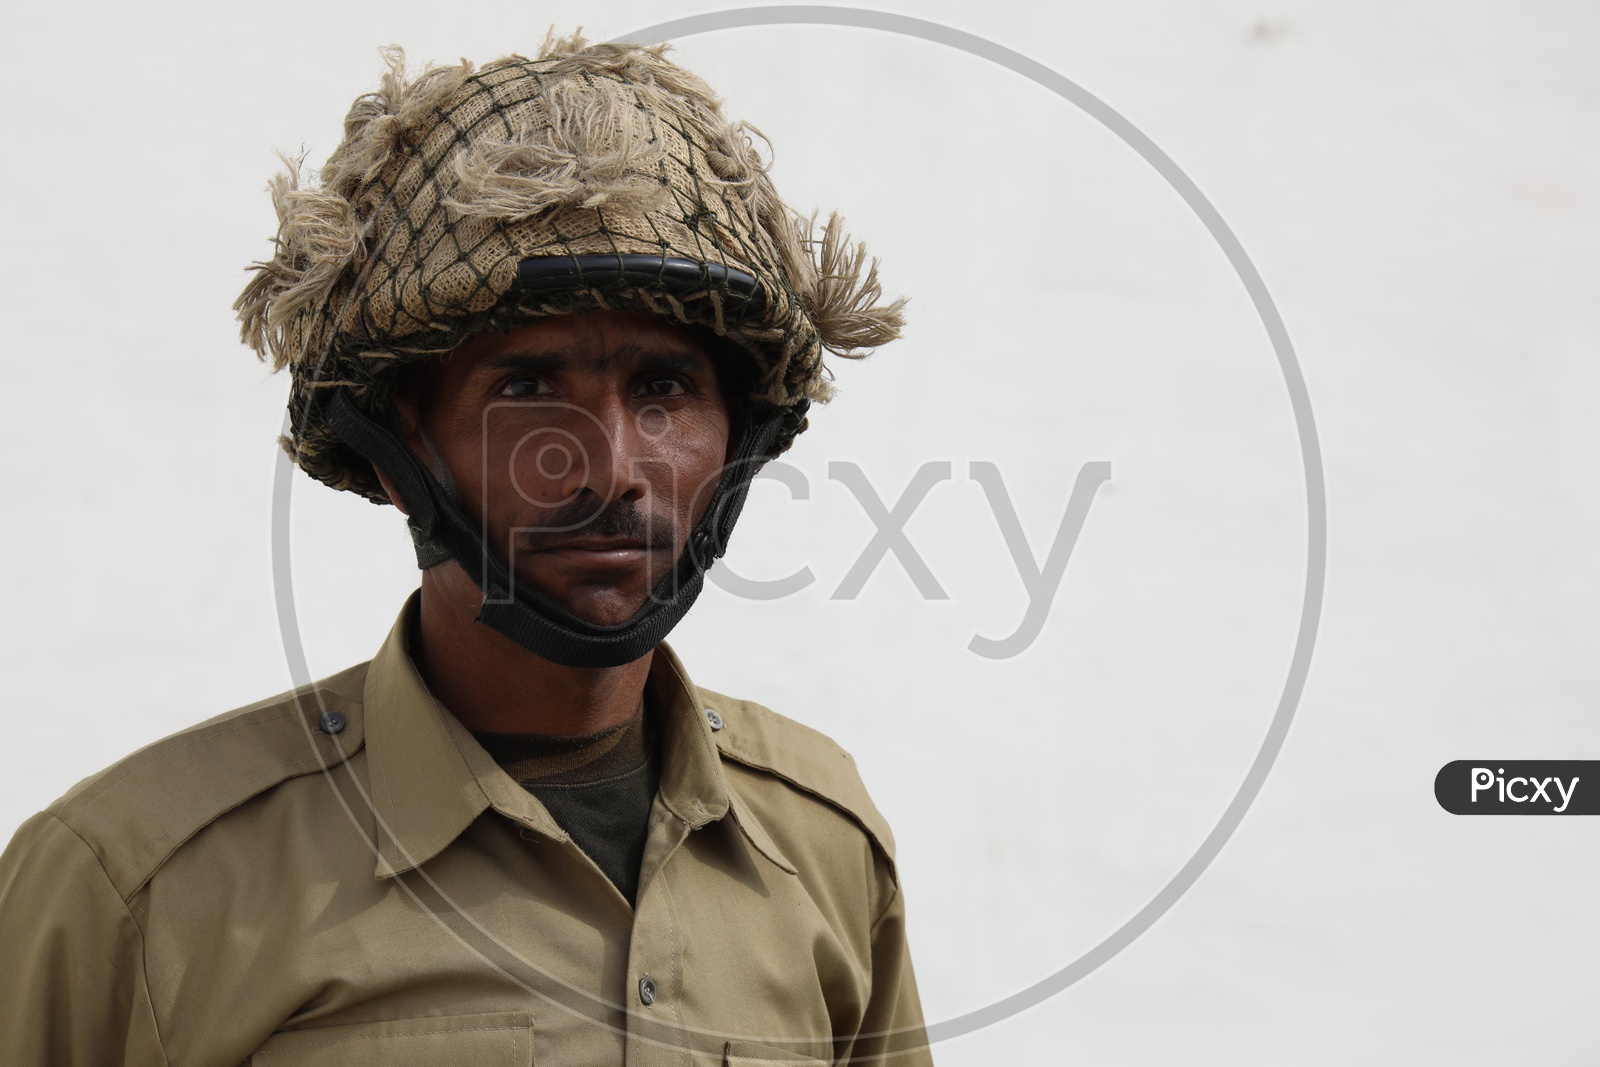 Indian Army Soldier at Indian Army Day Celebrations at Parade Ground in Delhi